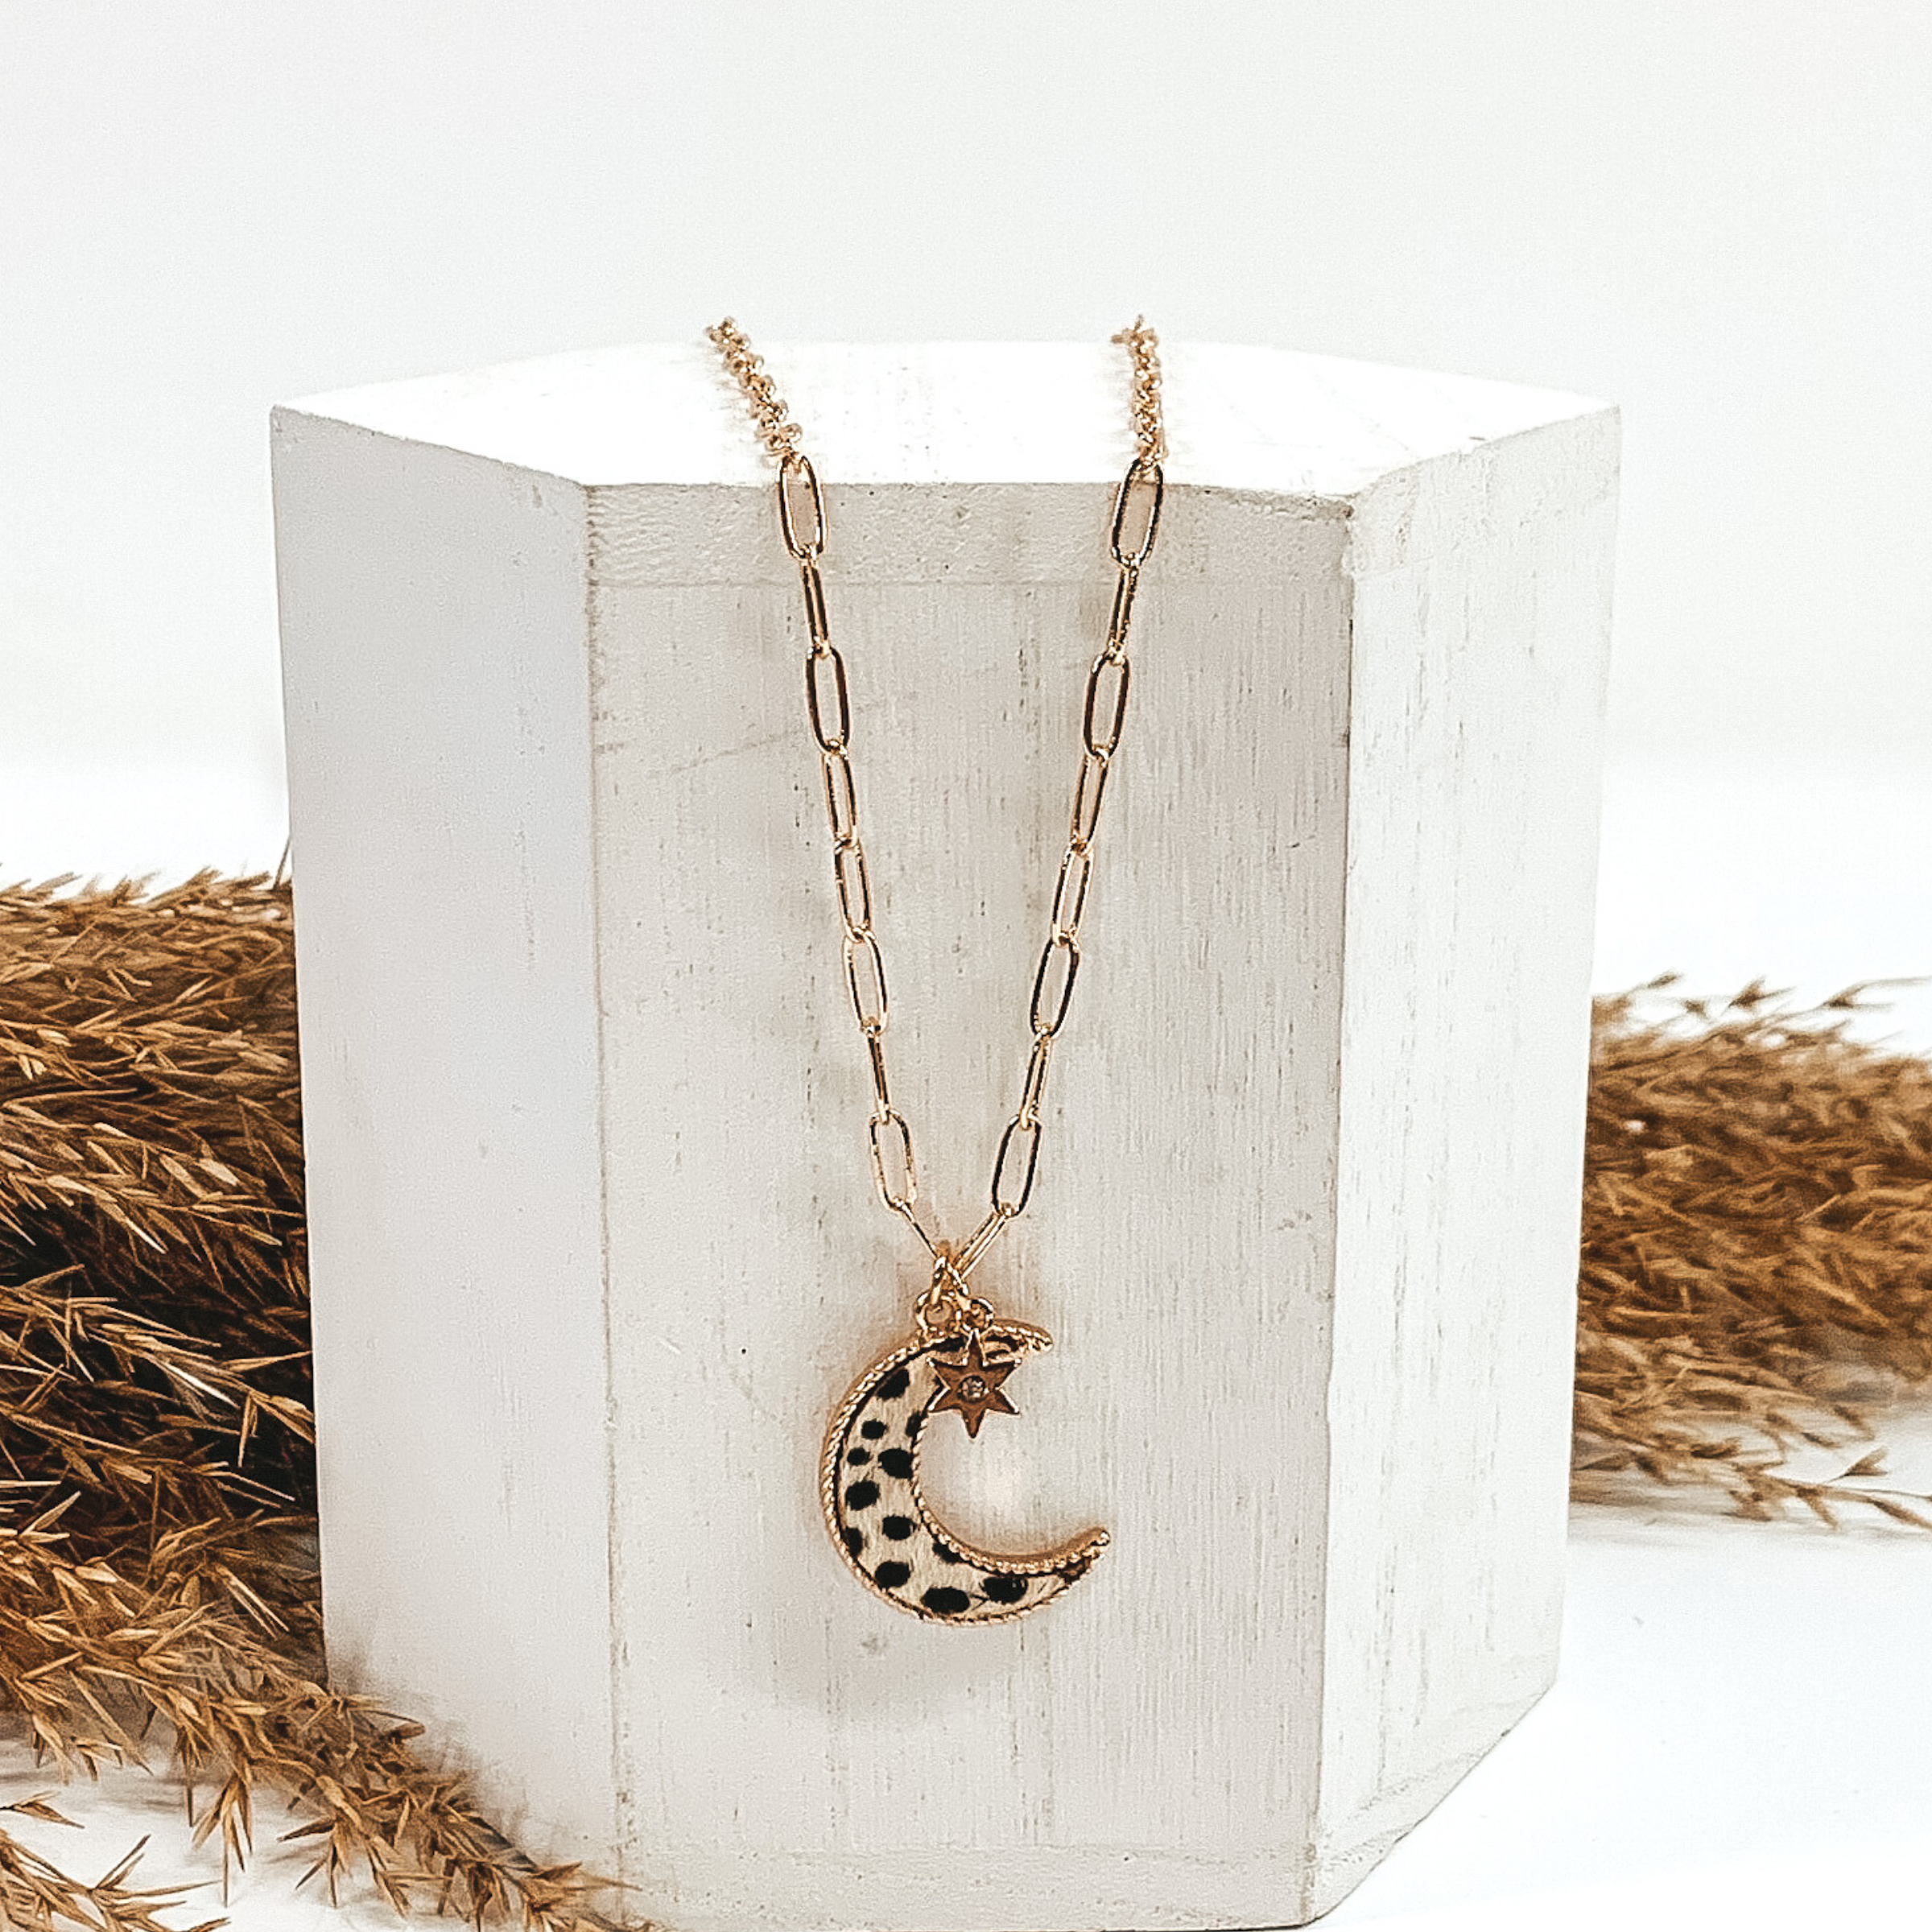 Gold paperclip chain with moon pendant and gold star charm with a tiny center crystal. The pendant has a white hide inlay with black dots. This necklace is pictured laying on a white block with tan floral behind it. This is all pictured on a white background.